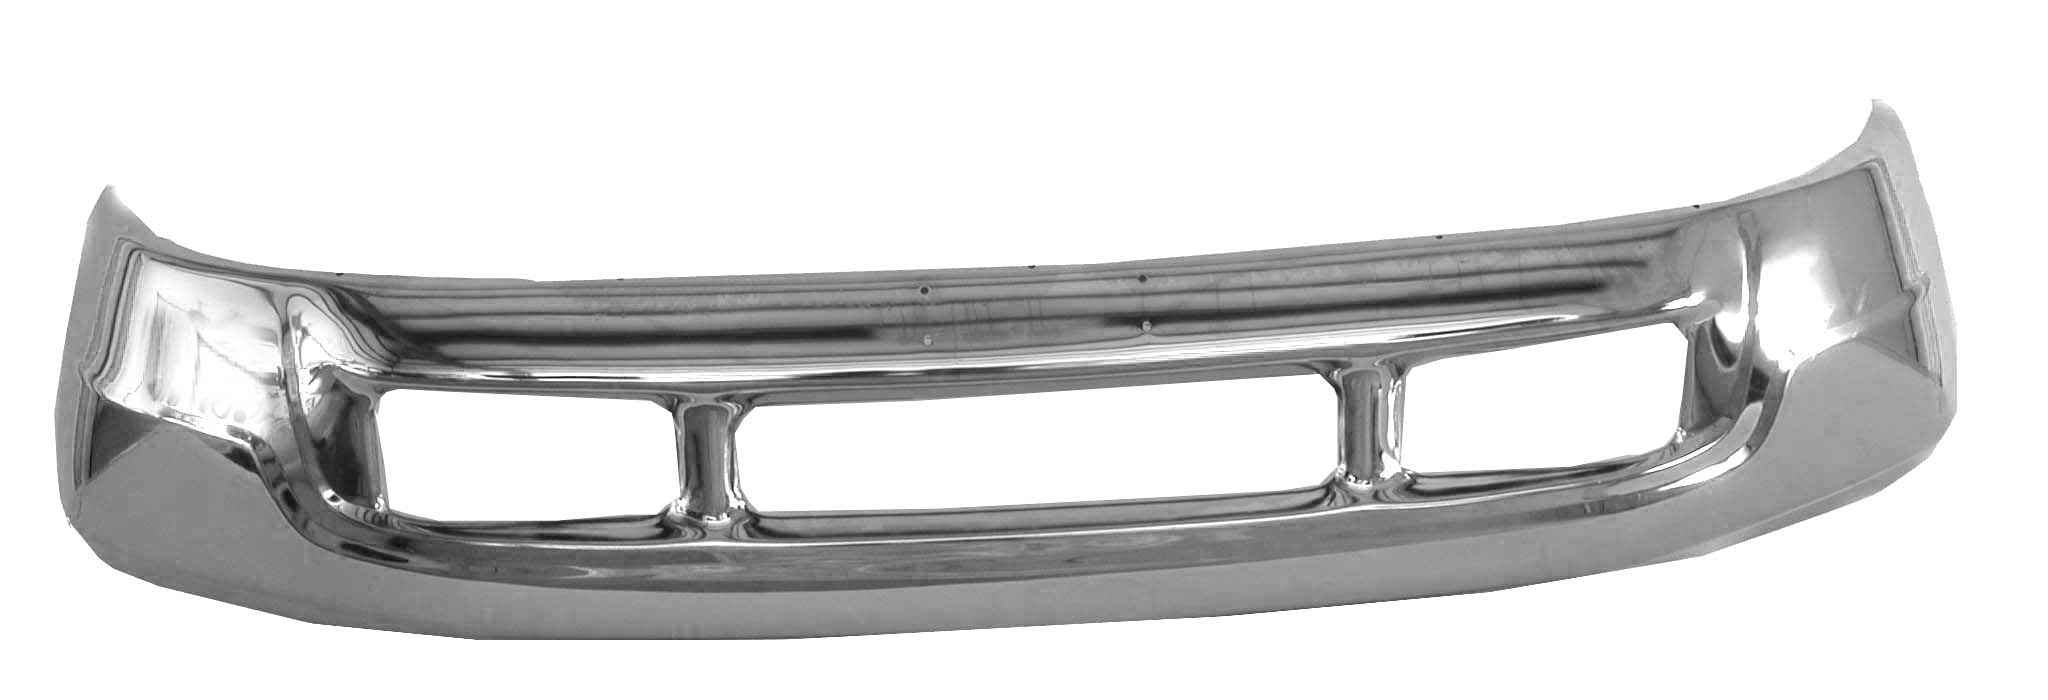 SUPER DUTY 99-04 Front Bumper Chrome With VALANCE HOLE